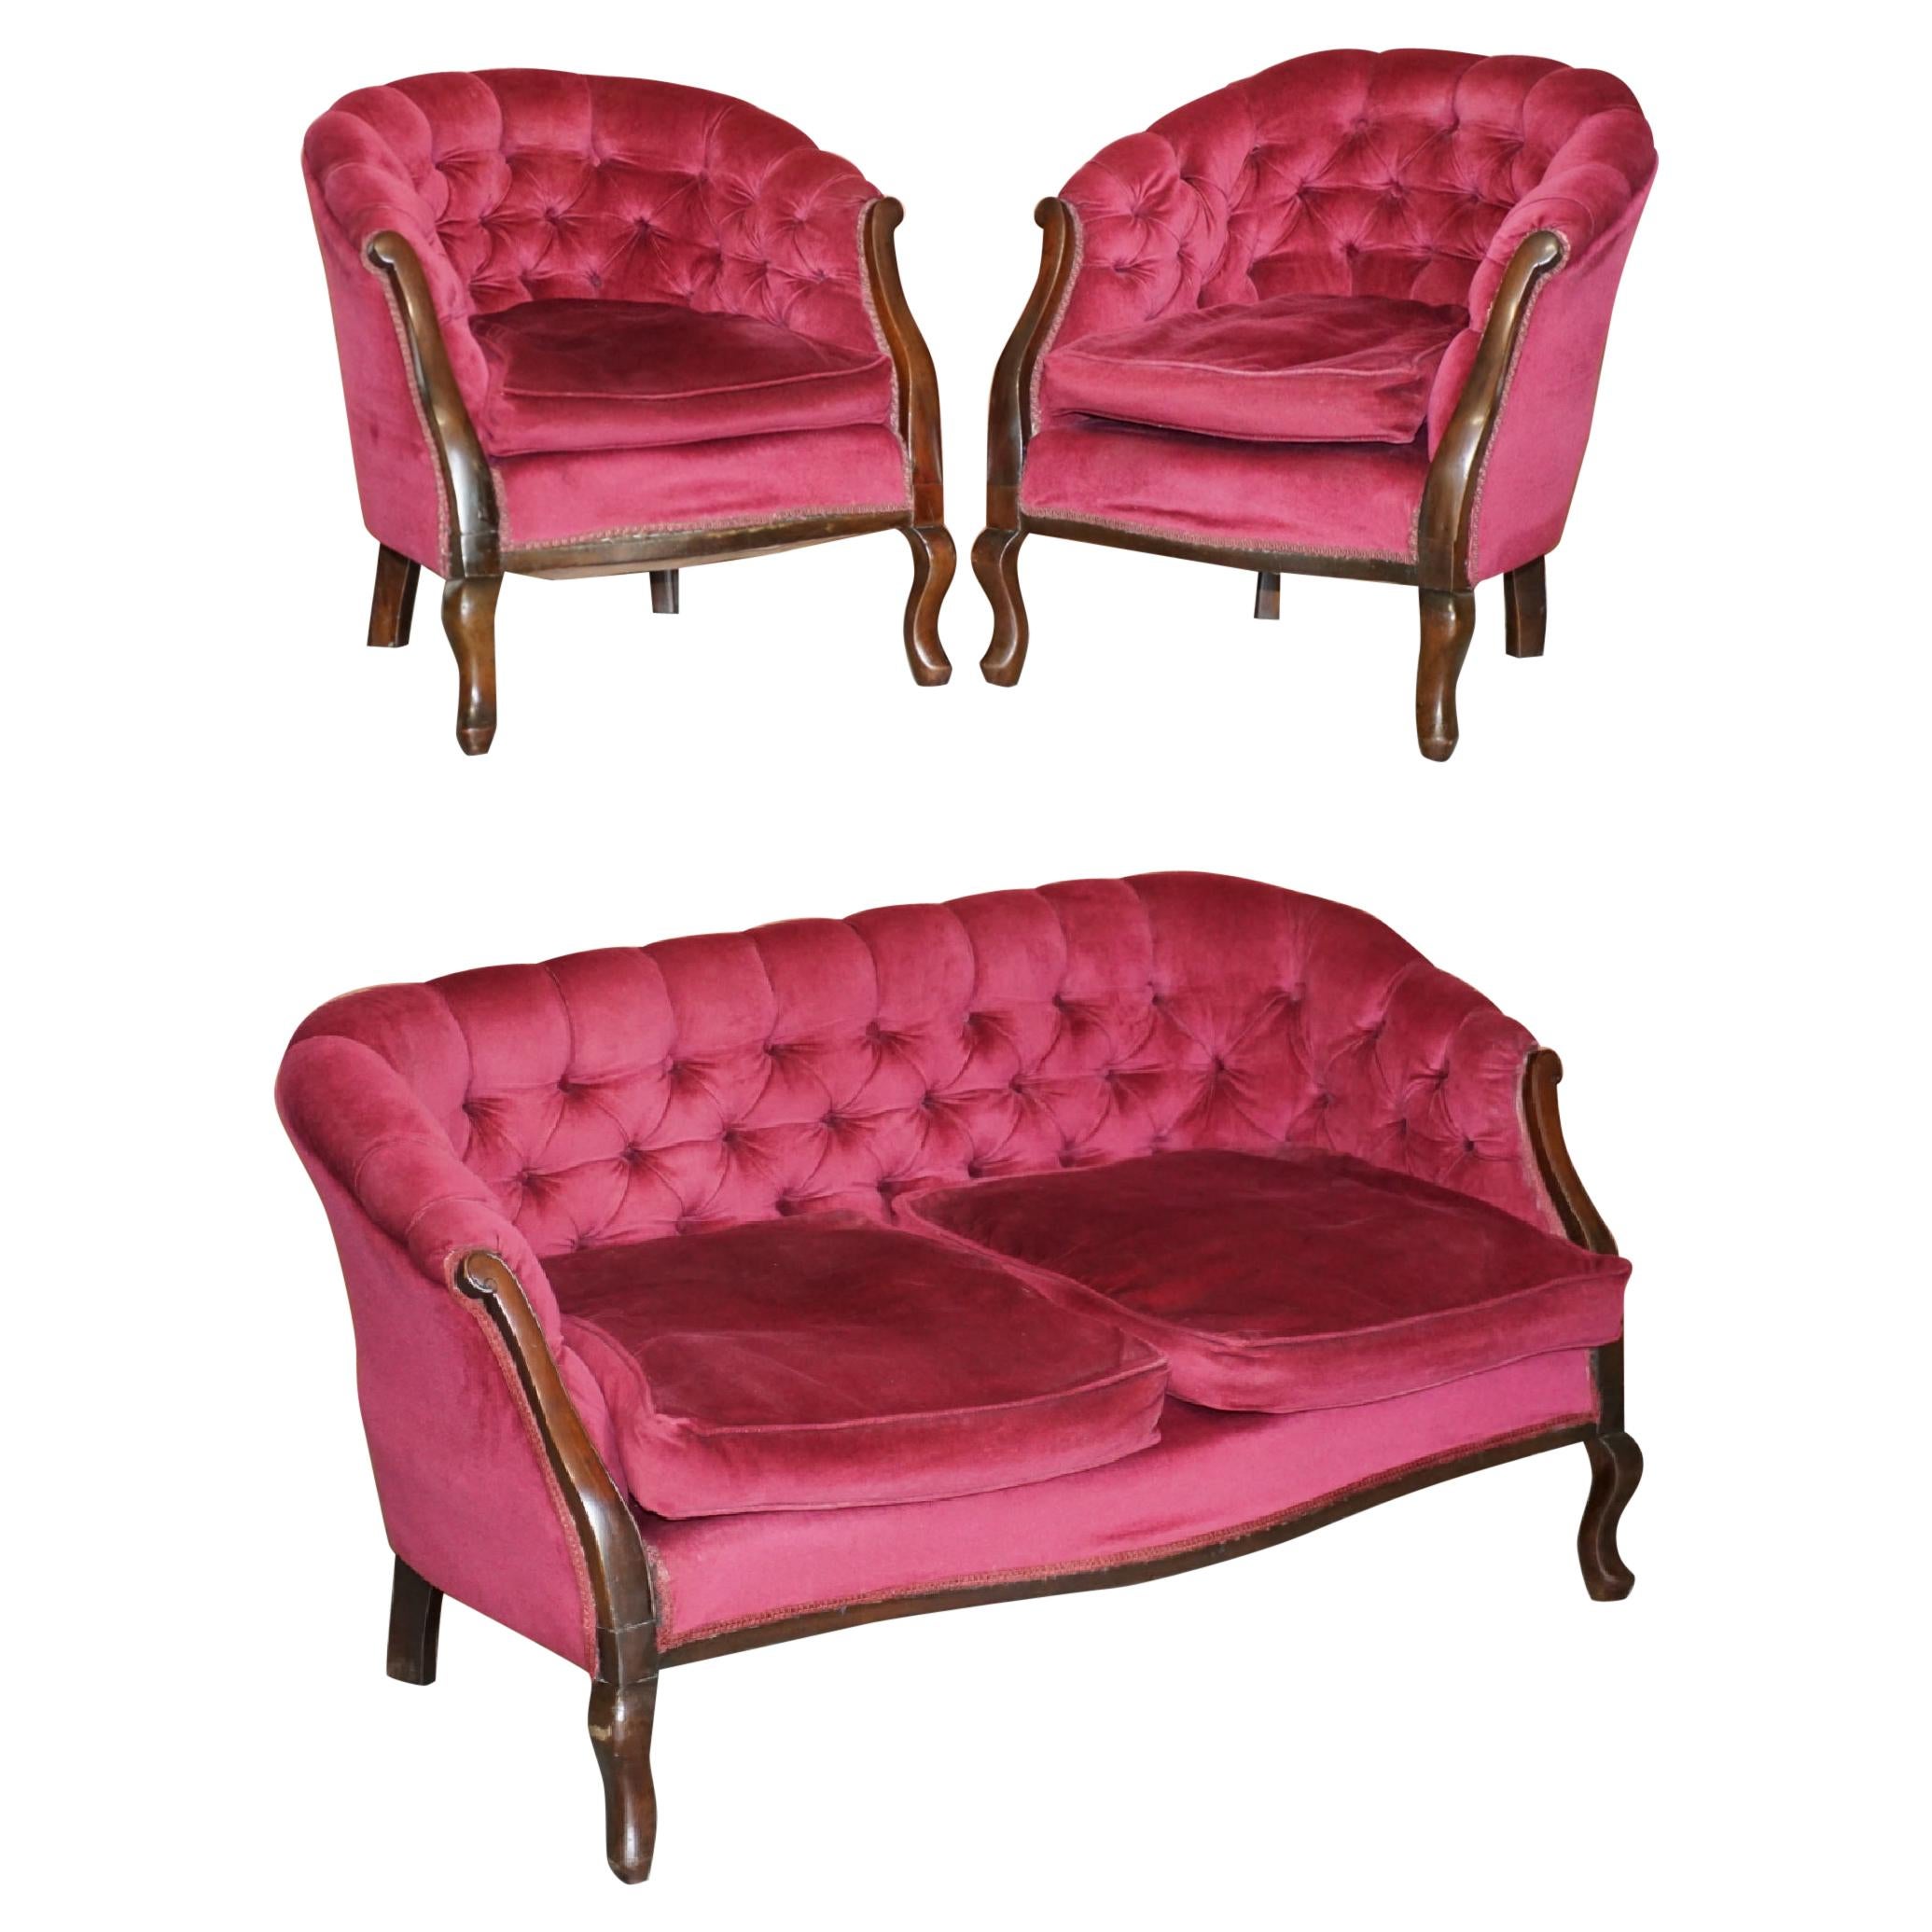 New VICTORIAN UPHOLSTERED Pink Striped Satin DOLL Or BEAR Display SOFA COUCH 